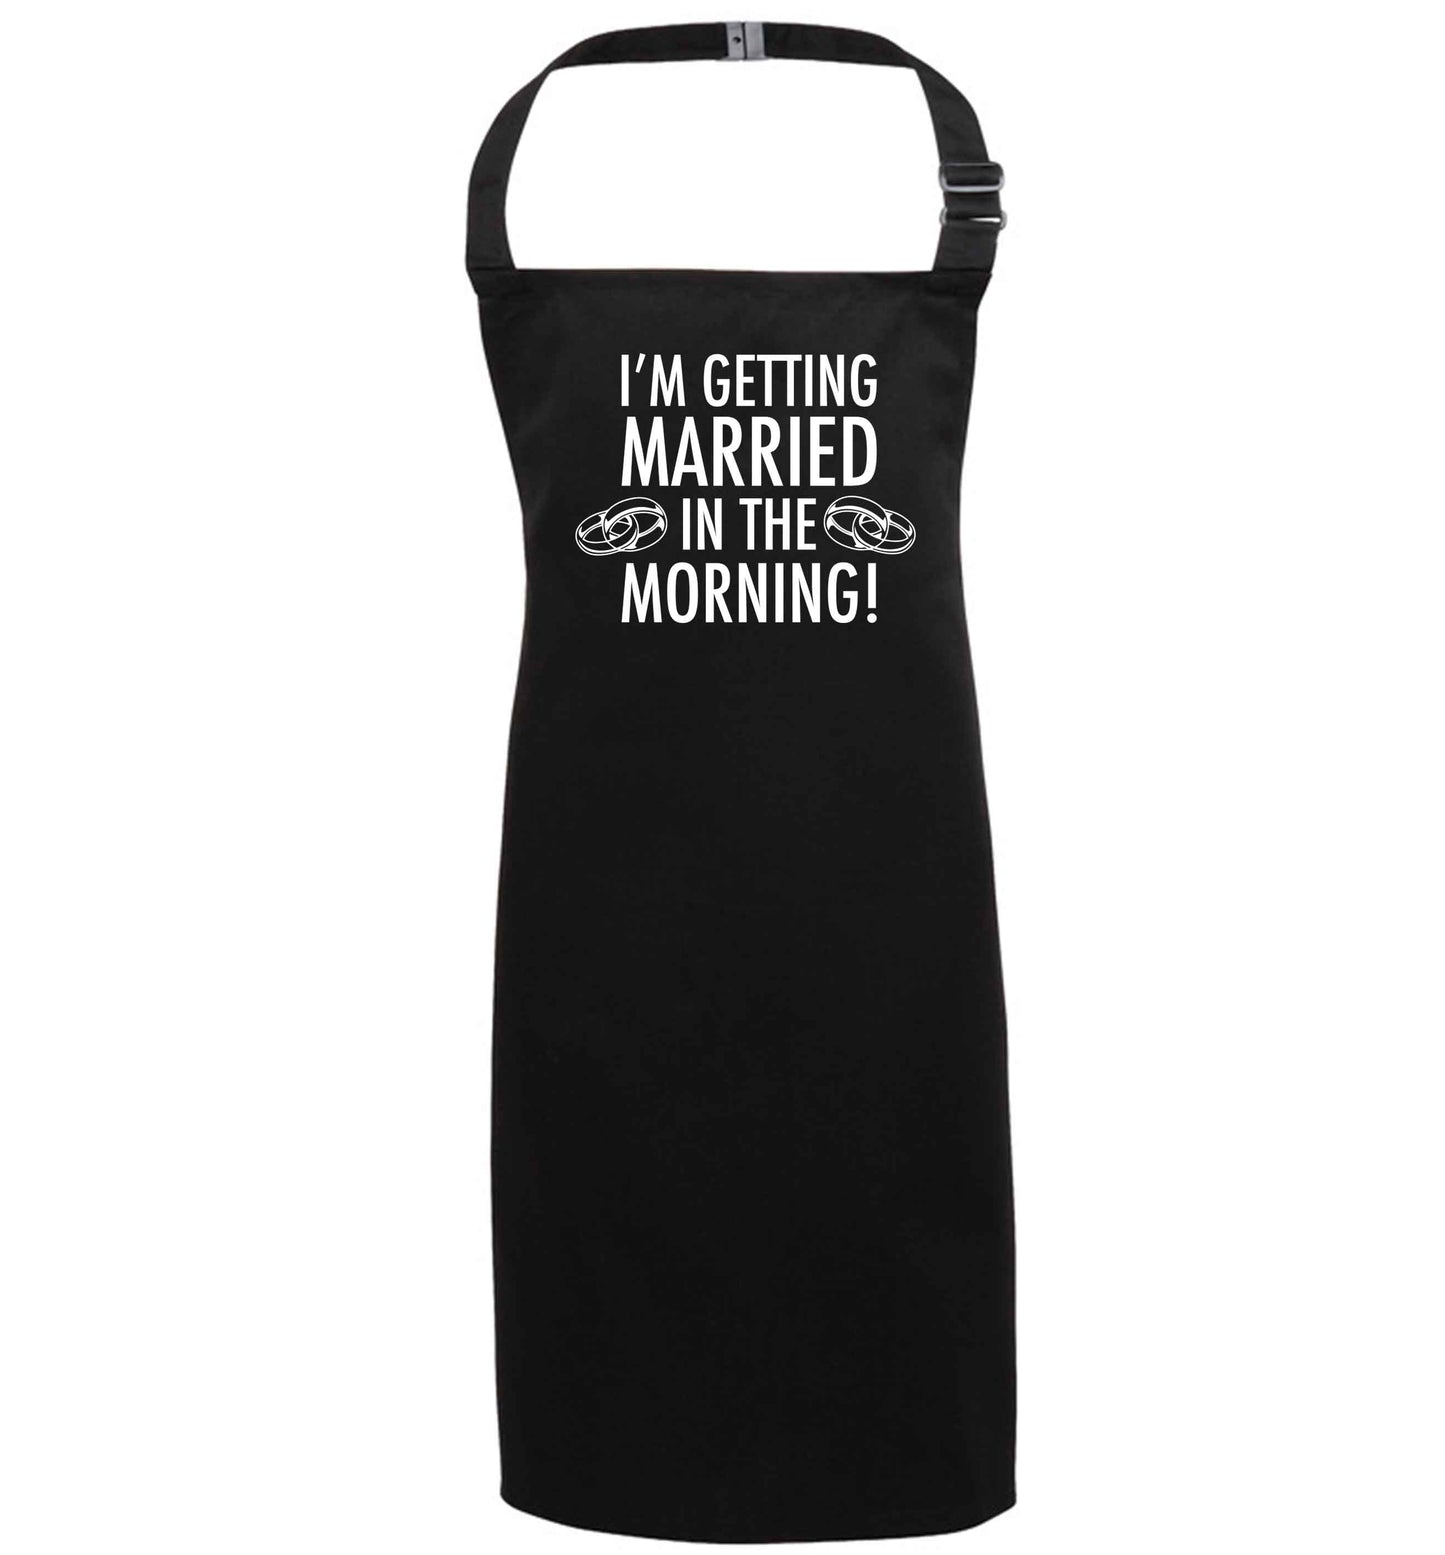 I'm getting married in the morning! black apron 7-10 years